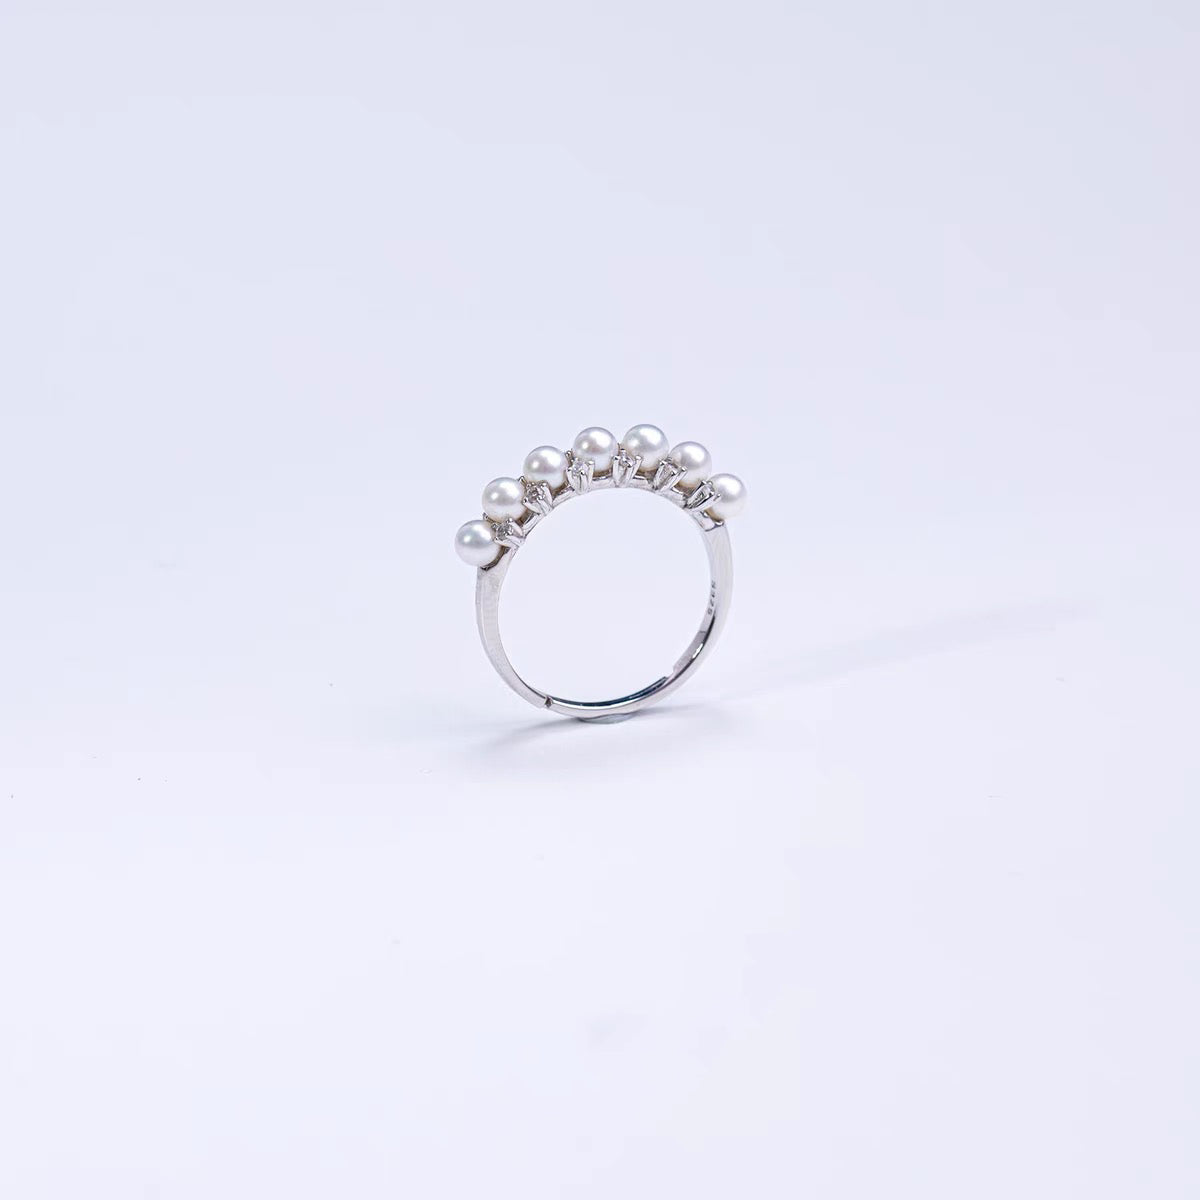 3.0-3.5 mm White Baby Pearl Ring